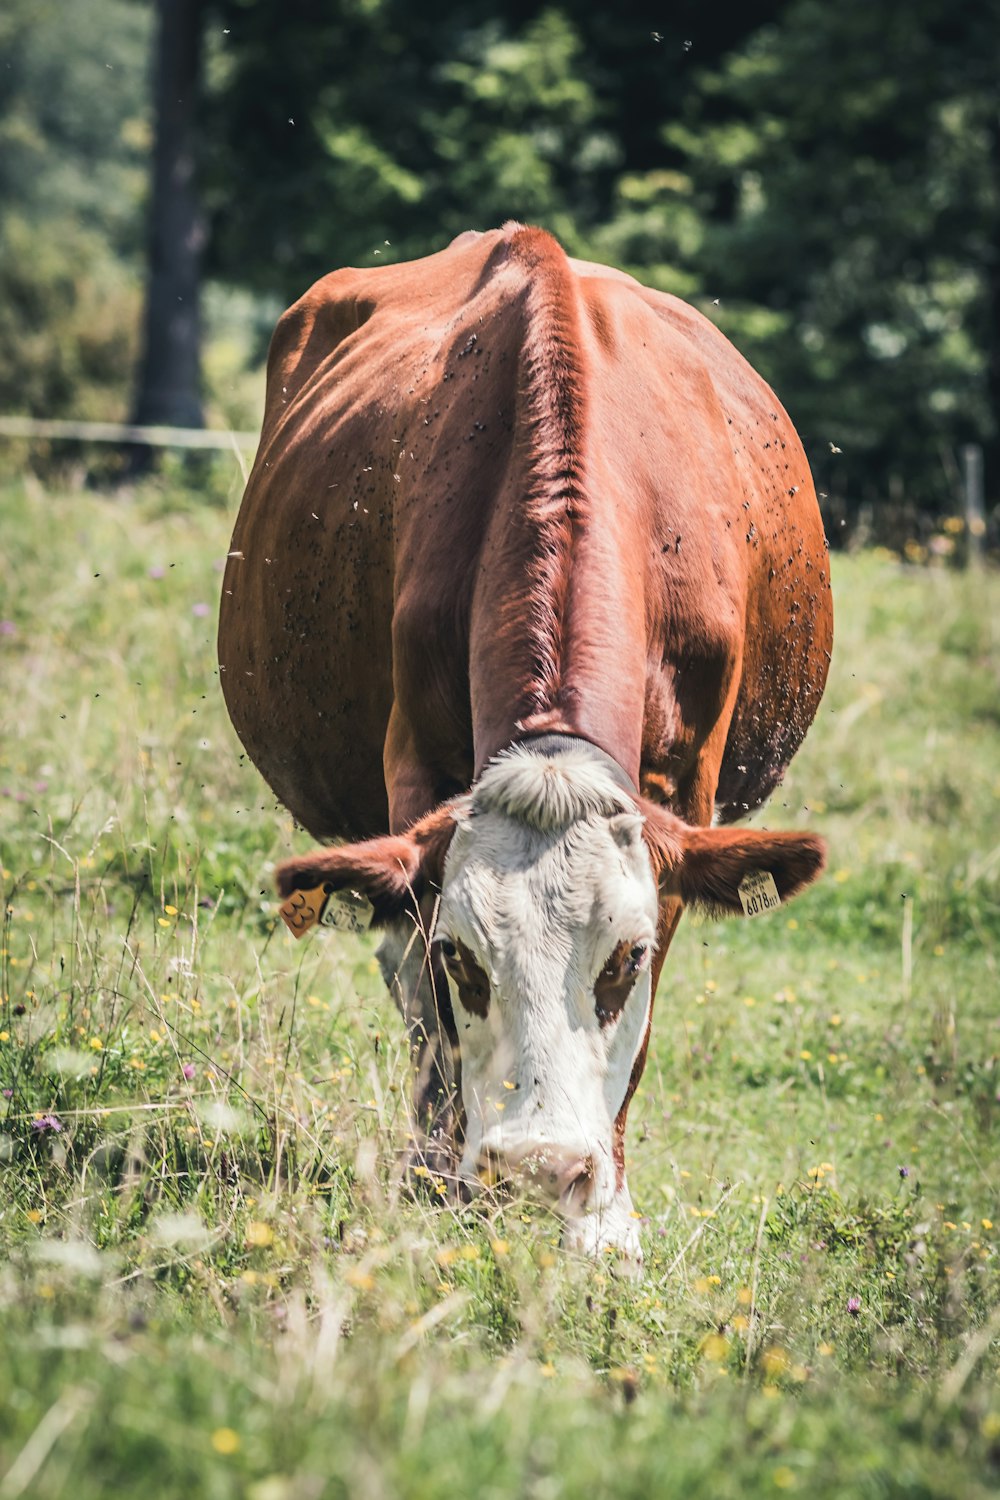 brown and white cow eating grass